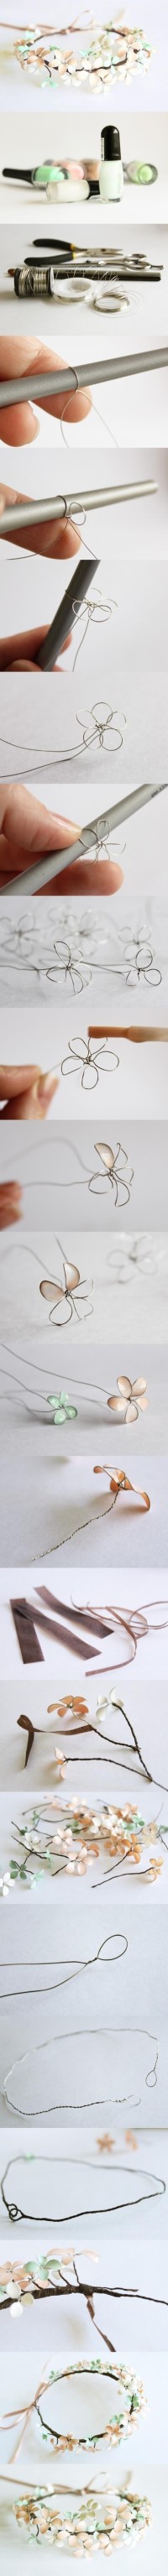 With thin wire, glue and nail polish to do some pretty flowers.